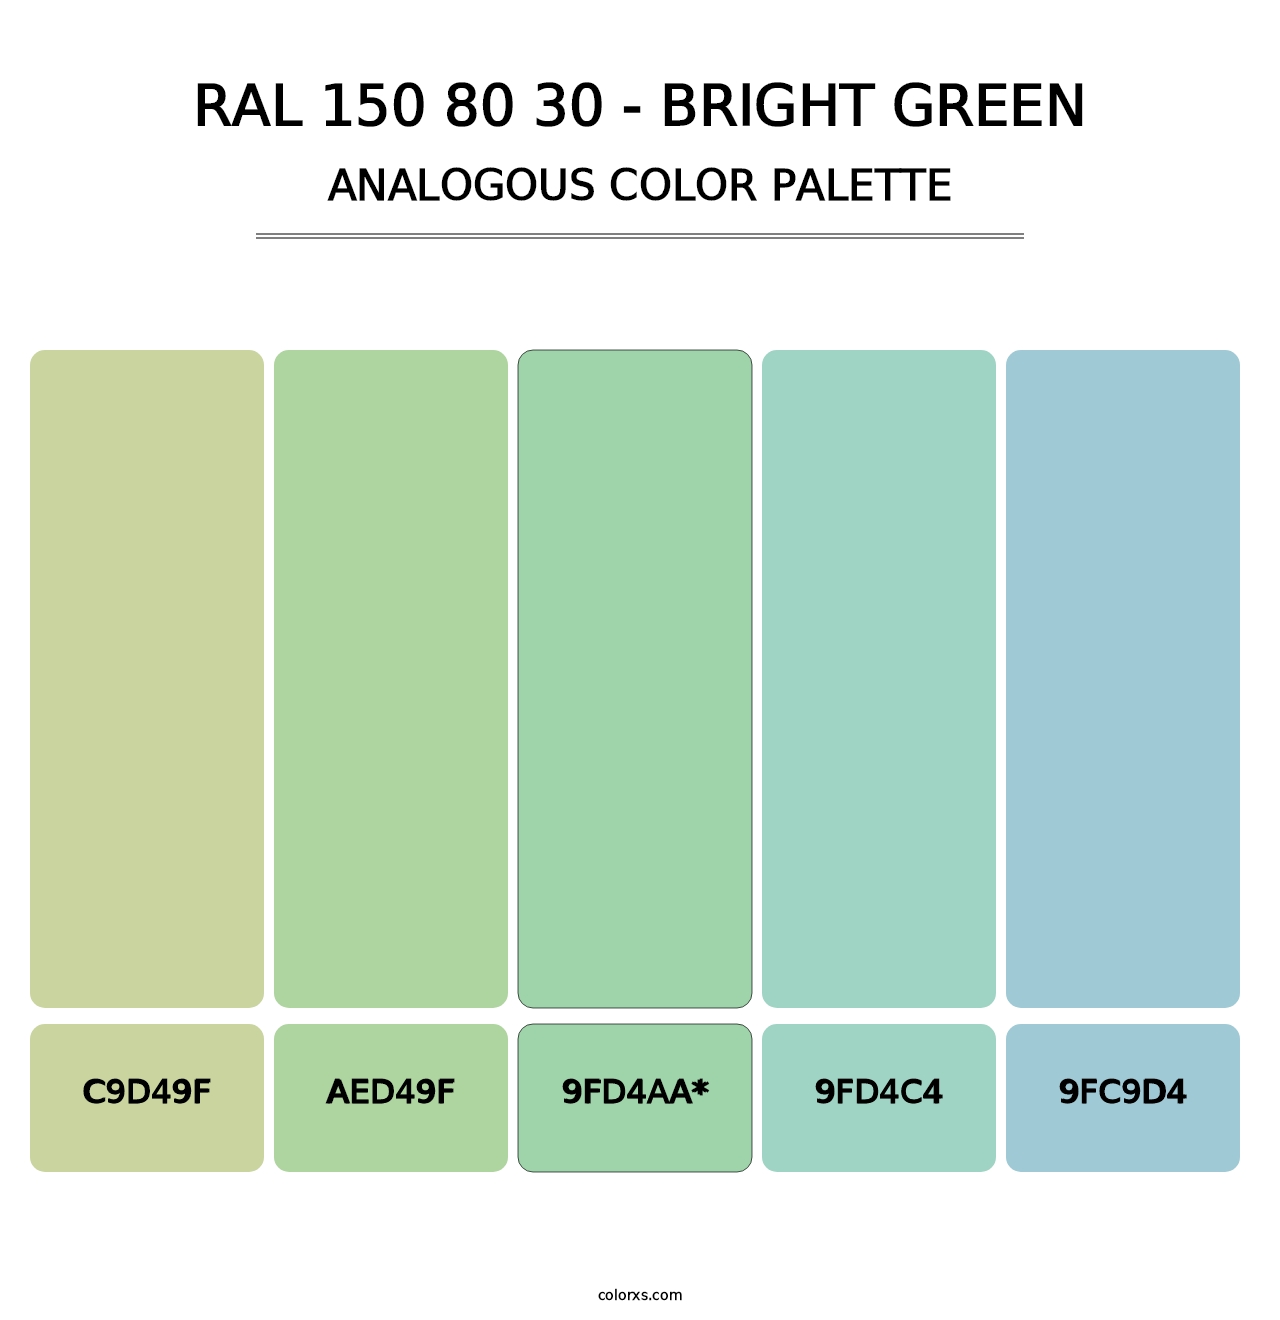 RAL 150 80 30 - Bright Green - Analogous Color Palette